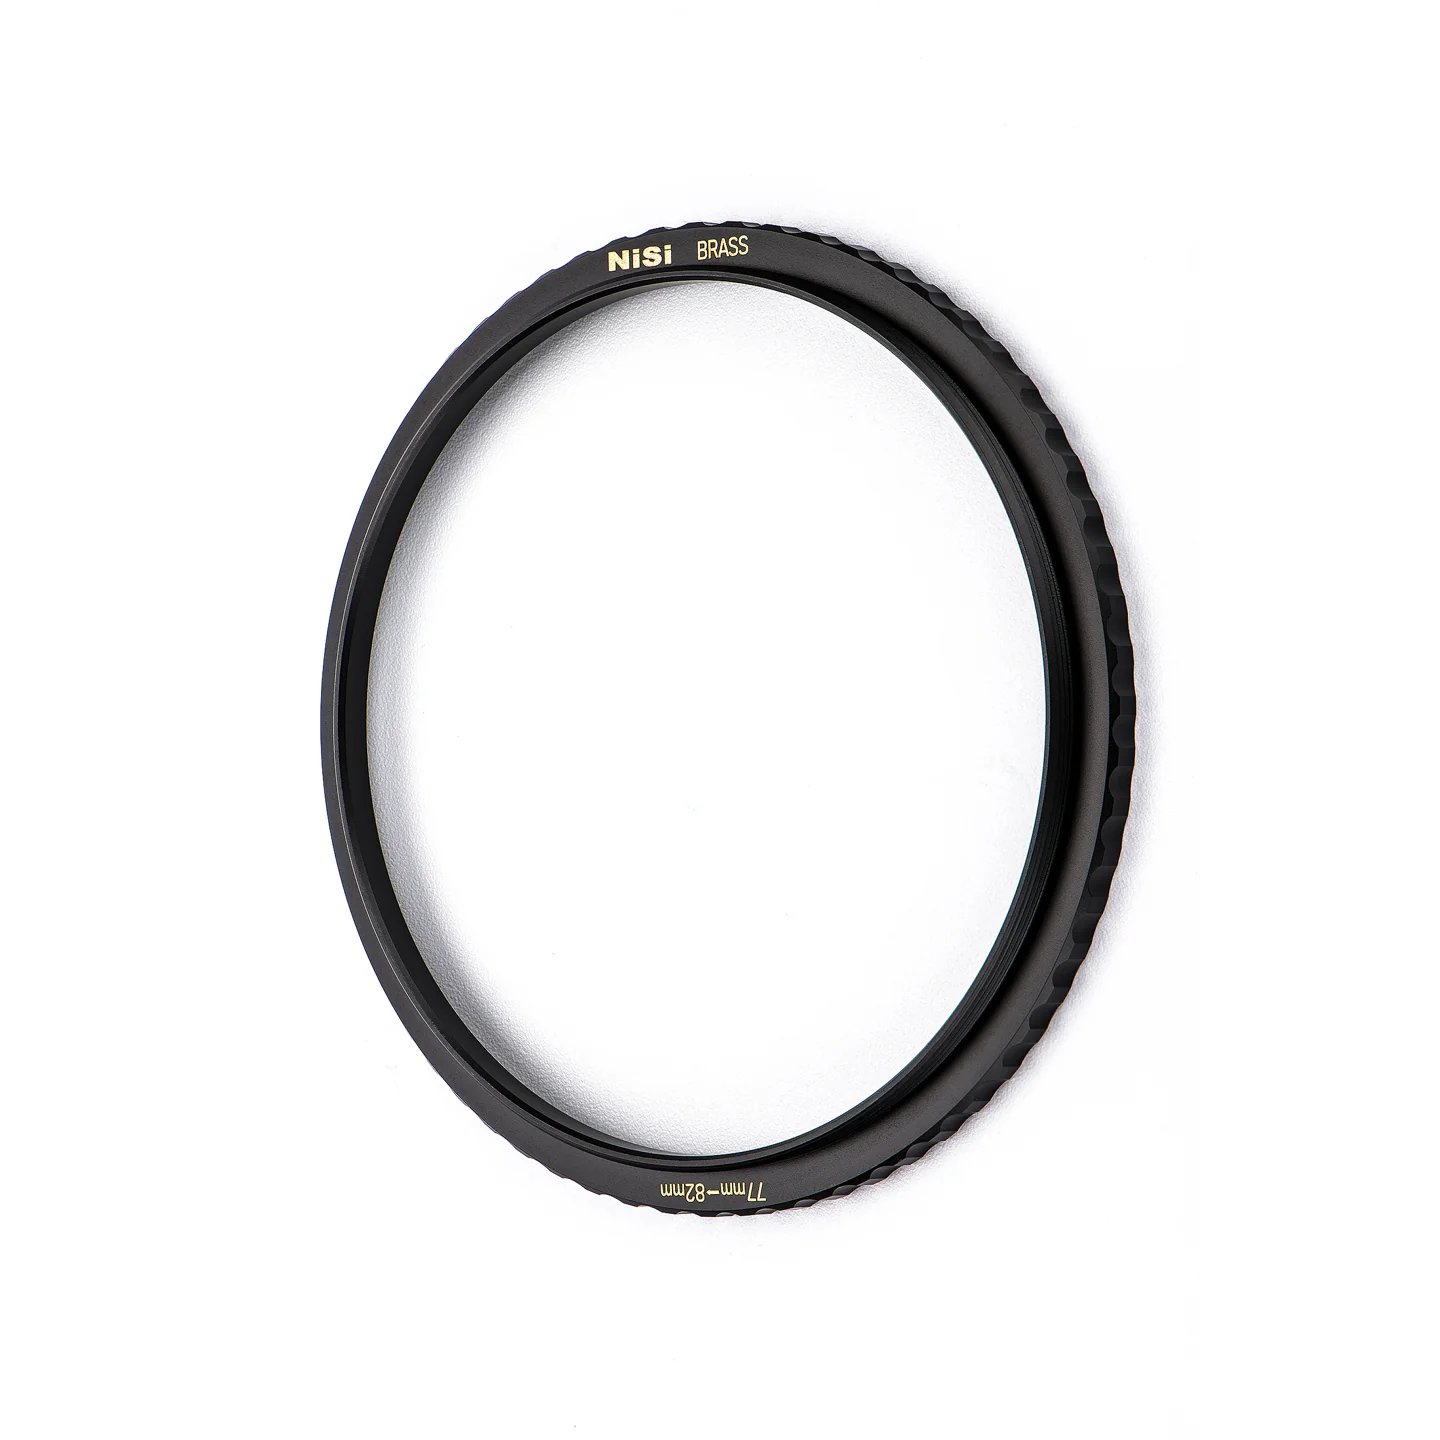 NiSi 72-82mm Brass Step Rings for Circular Filters